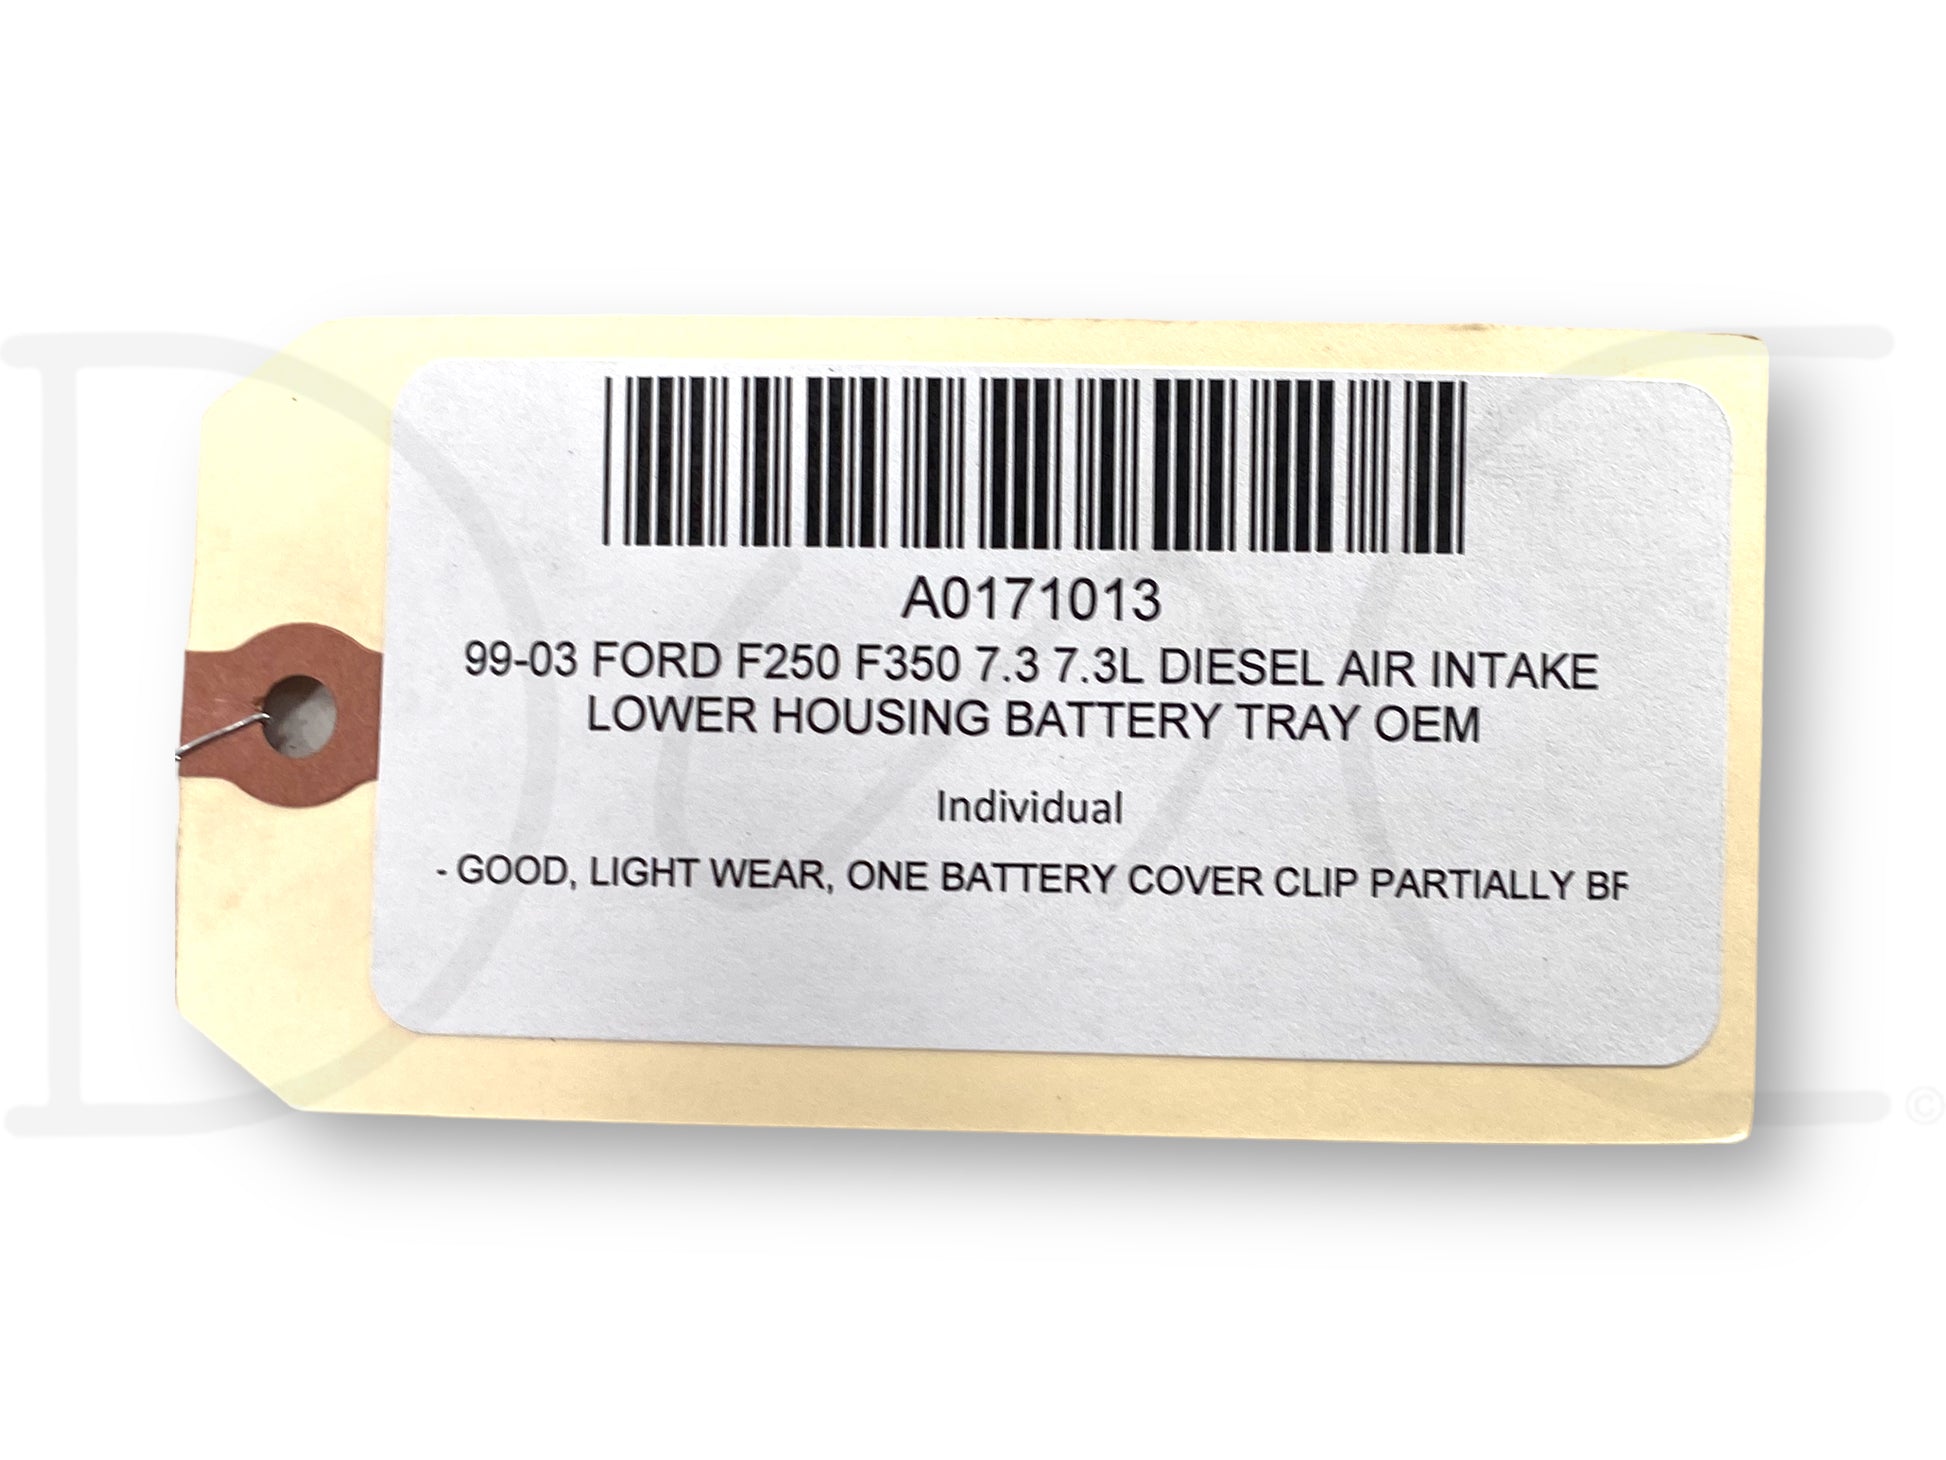 Genuine Ford Battery Cover Clips